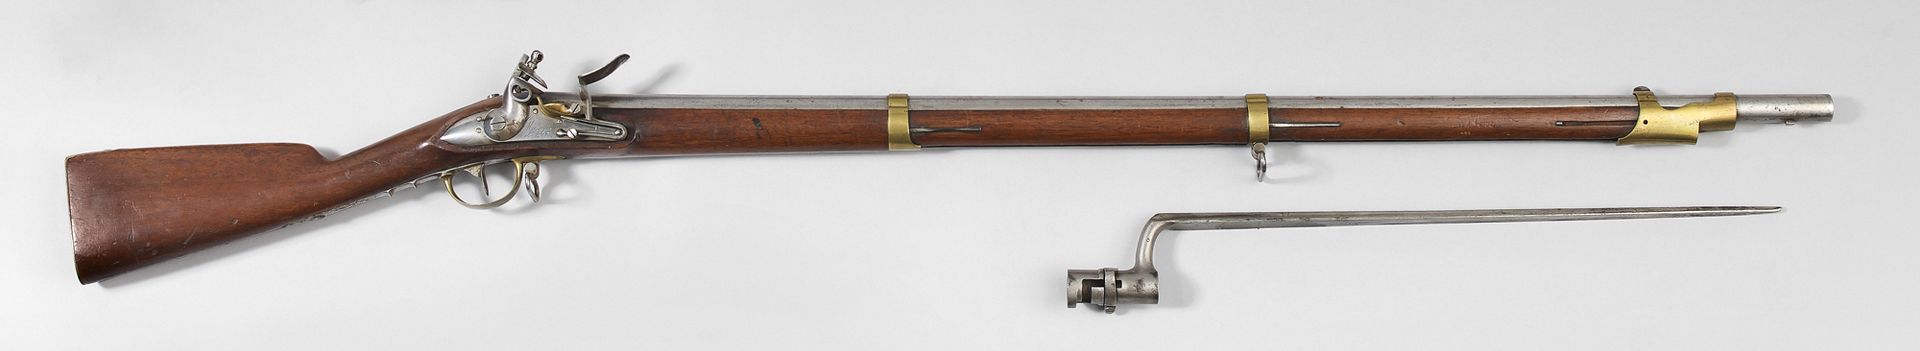 Null 1822 dragon-type flintlock rifle, unidentified model, probably privately ma&hellip;